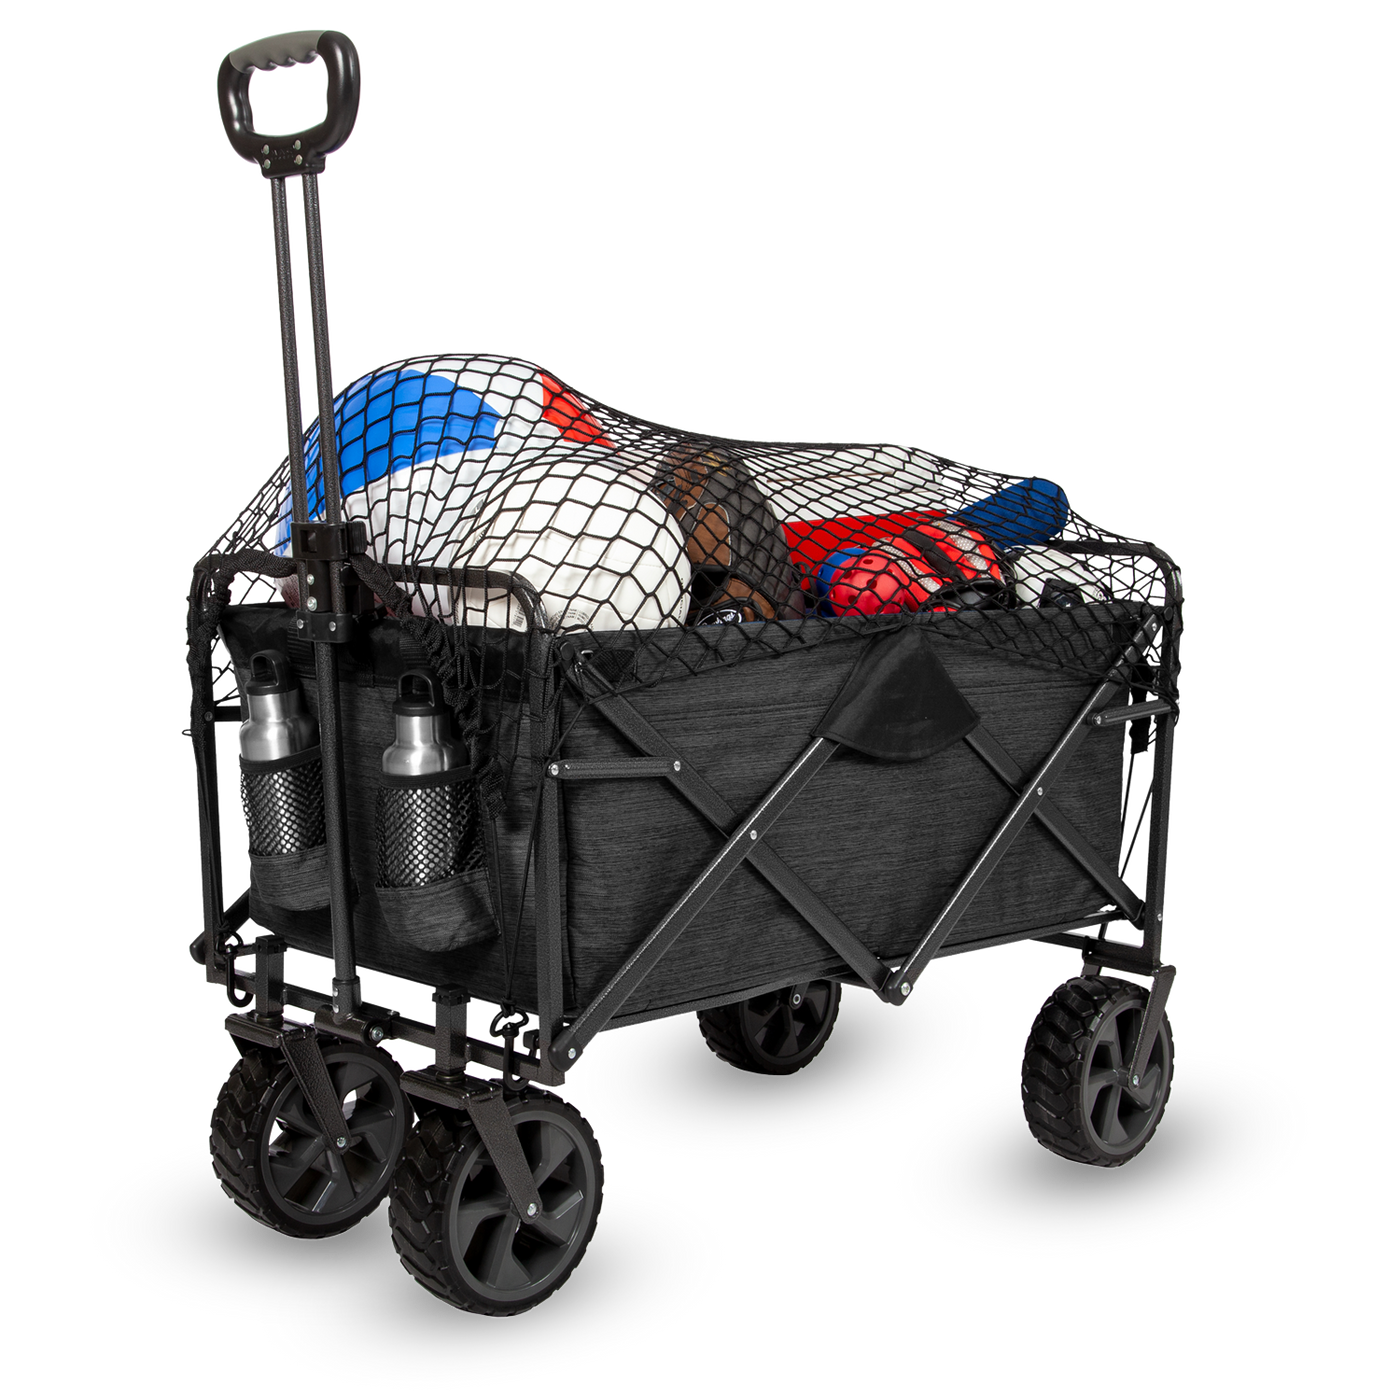 Cargo Net for Wagons